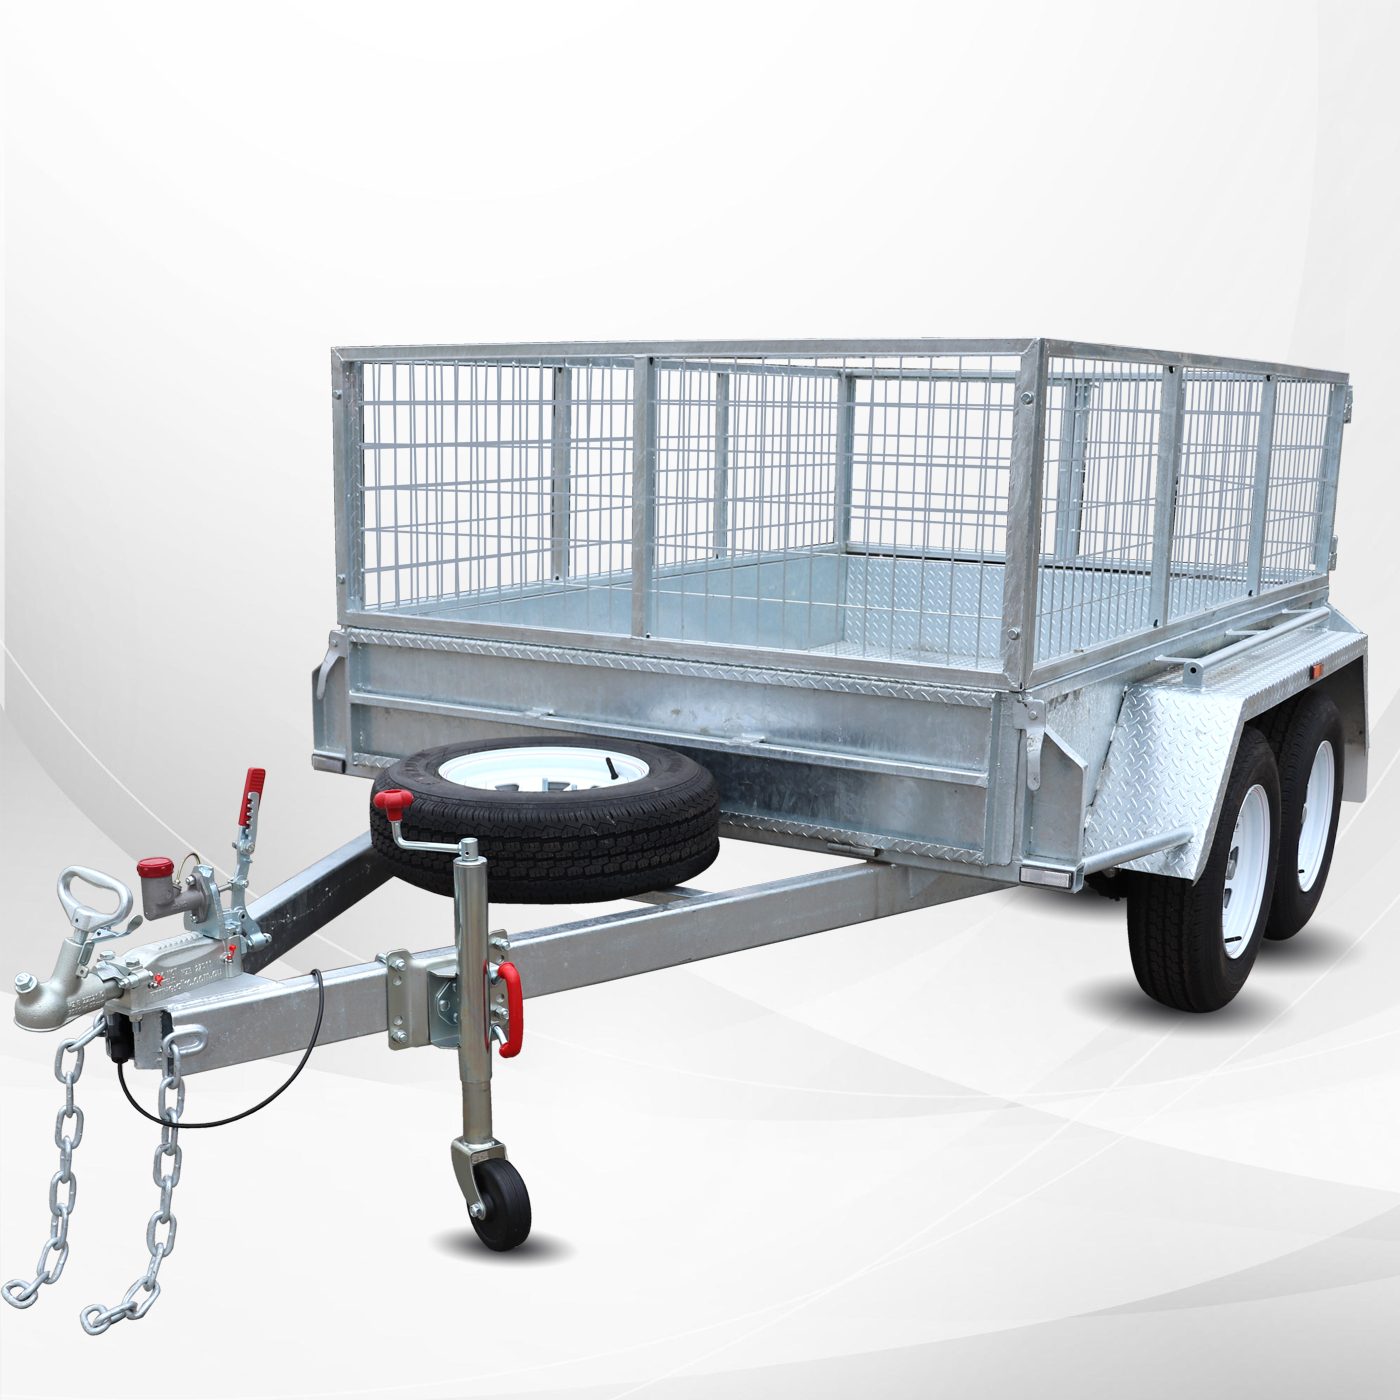 8x5 Australian Galvanised 2ft 600mm Cage Trailer for Sale in Melbourne